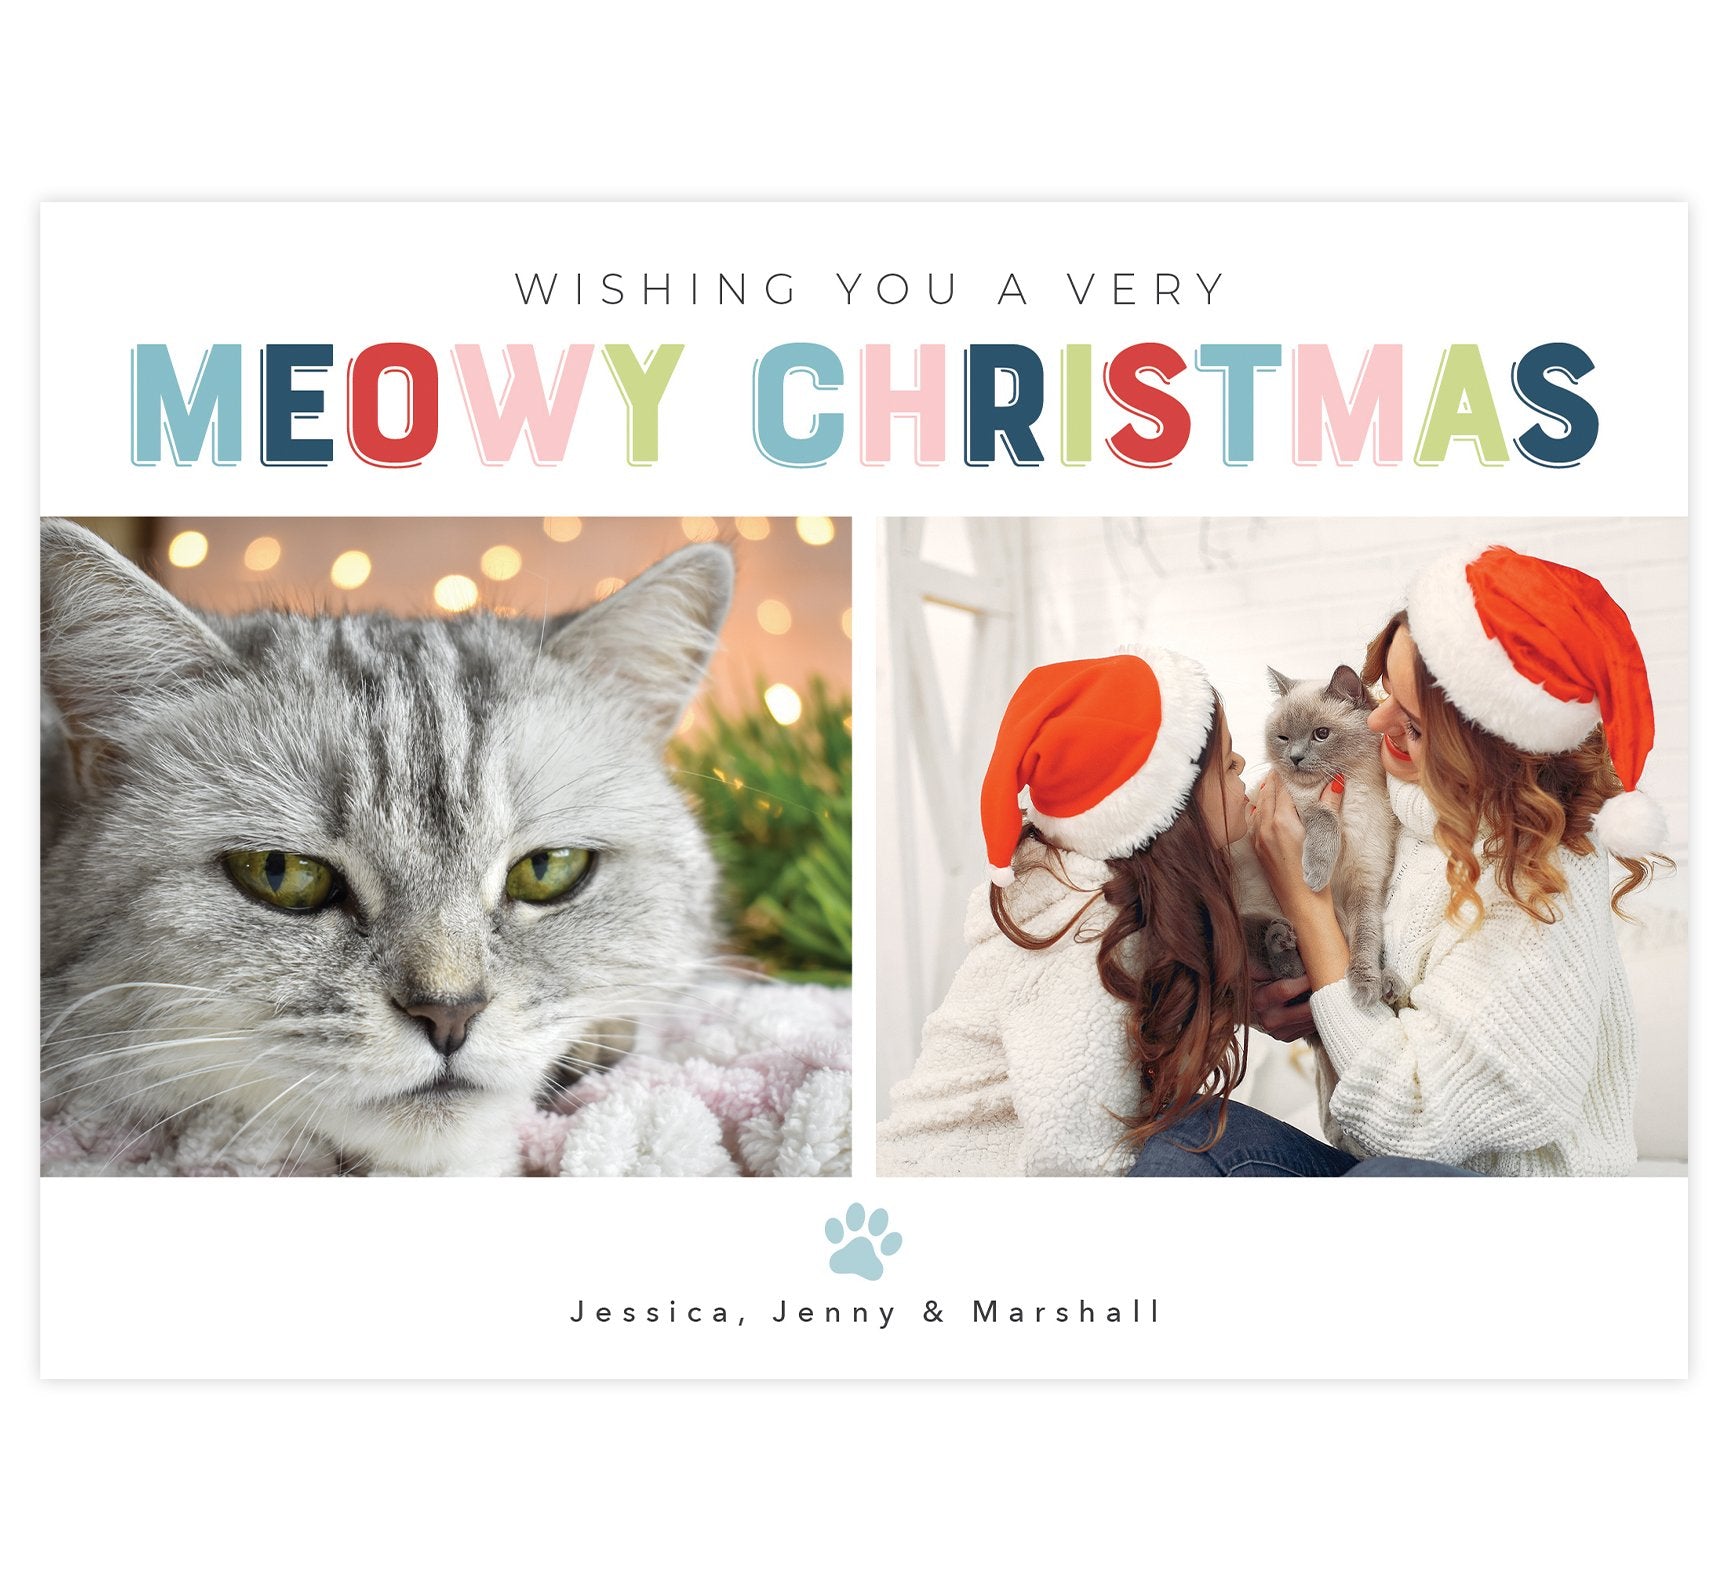 Meowy Christmas Holiday Card; White background with "Meowy Christmas" at the top and 2 image spots 